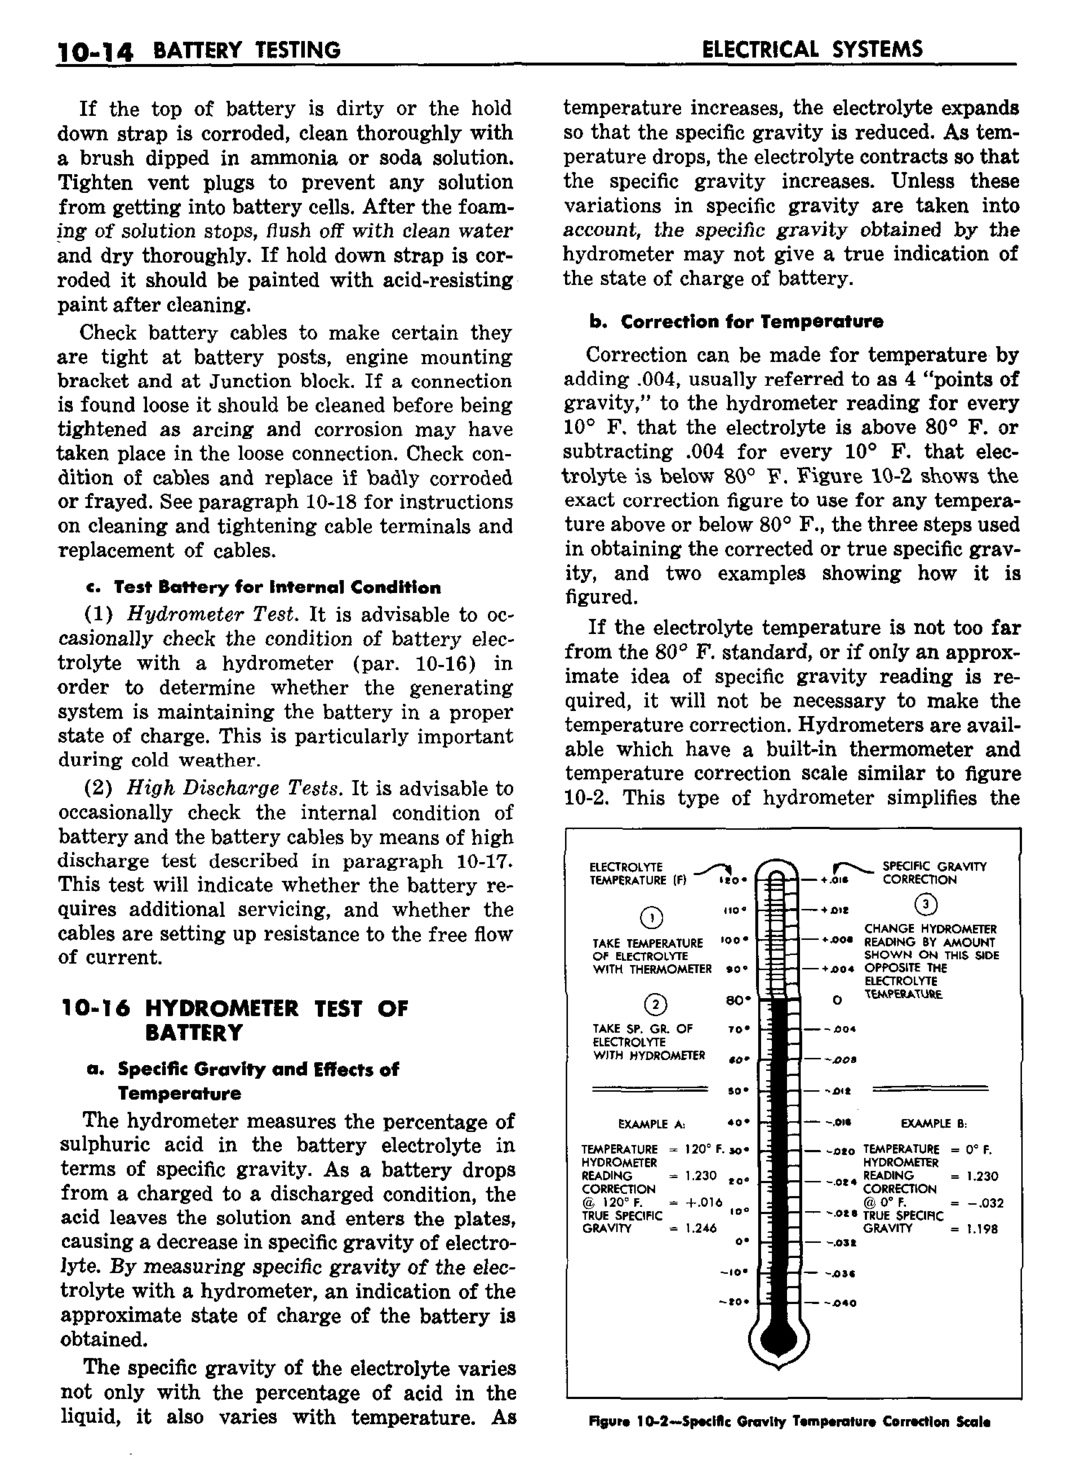 n_11 1959 Buick Shop Manual - Electrical Systems-014-014.jpg